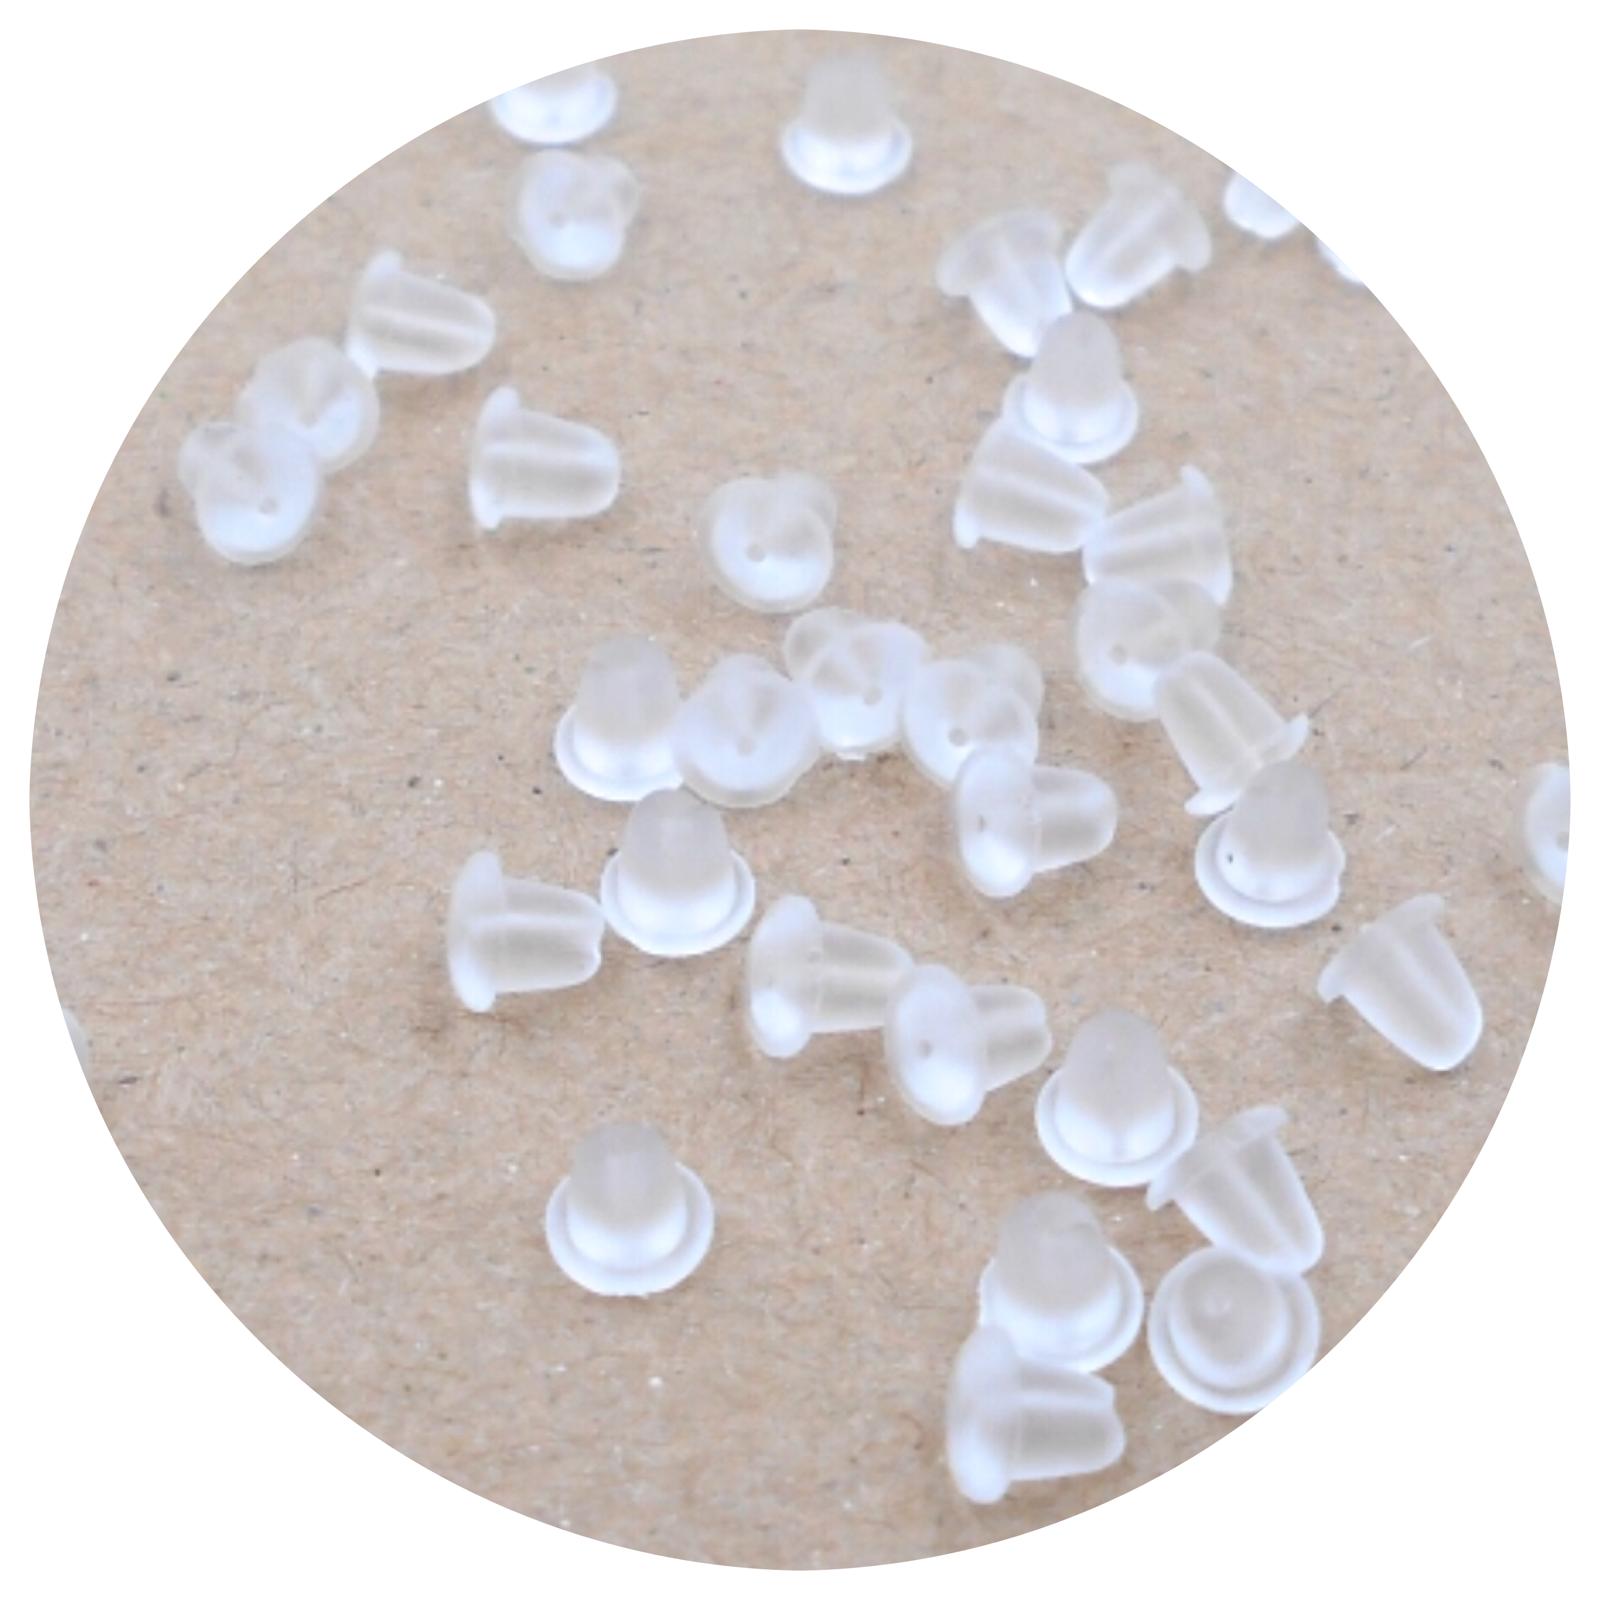 Silicone Stoppers/Backs (For Earrings & Cookie Scribe) - 50pcs